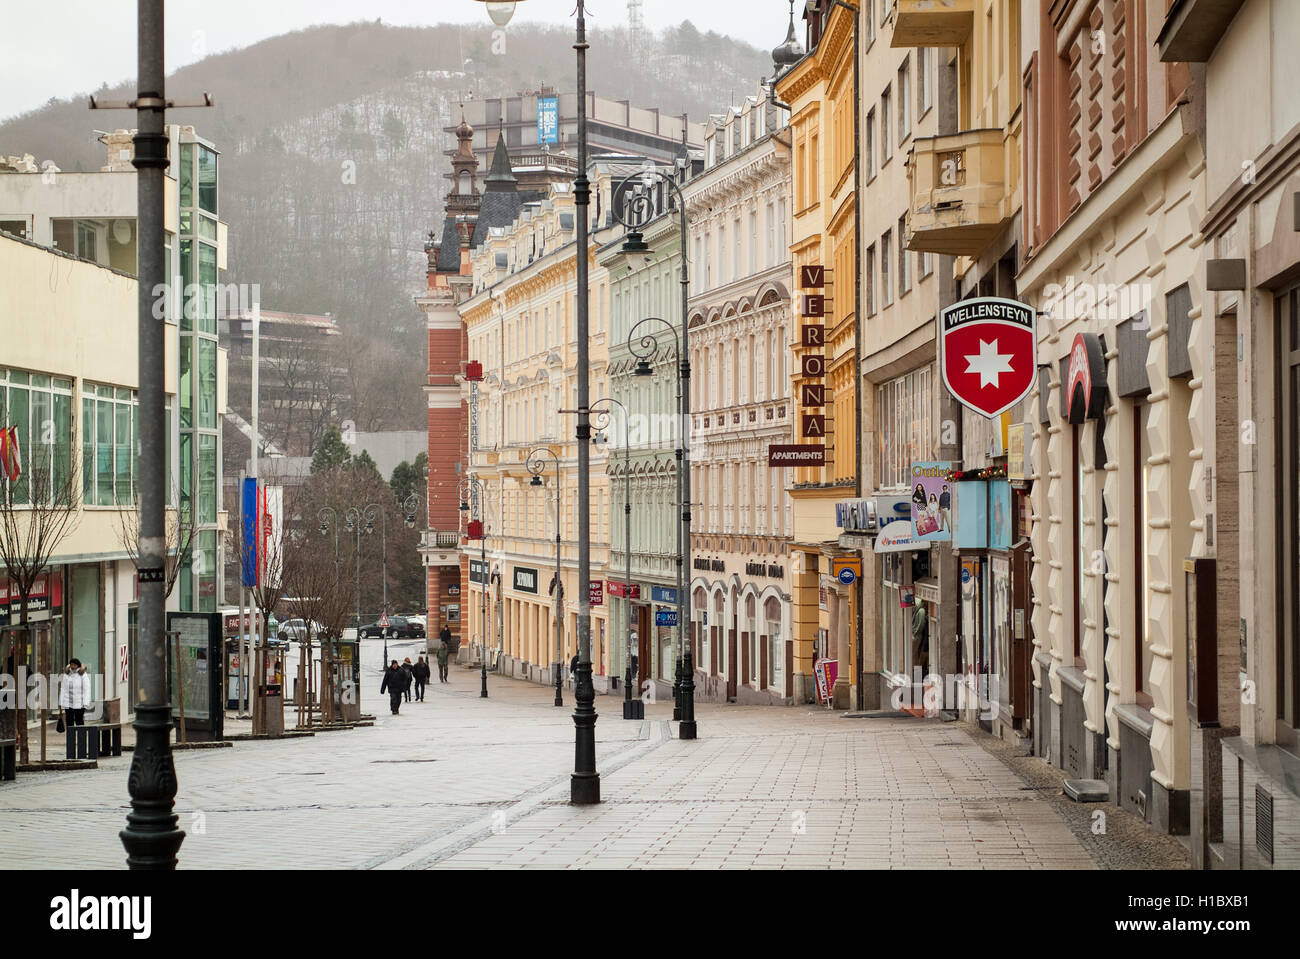 Shops In Karlovy Vary High Resolution Stock Photography and Images - Alamy